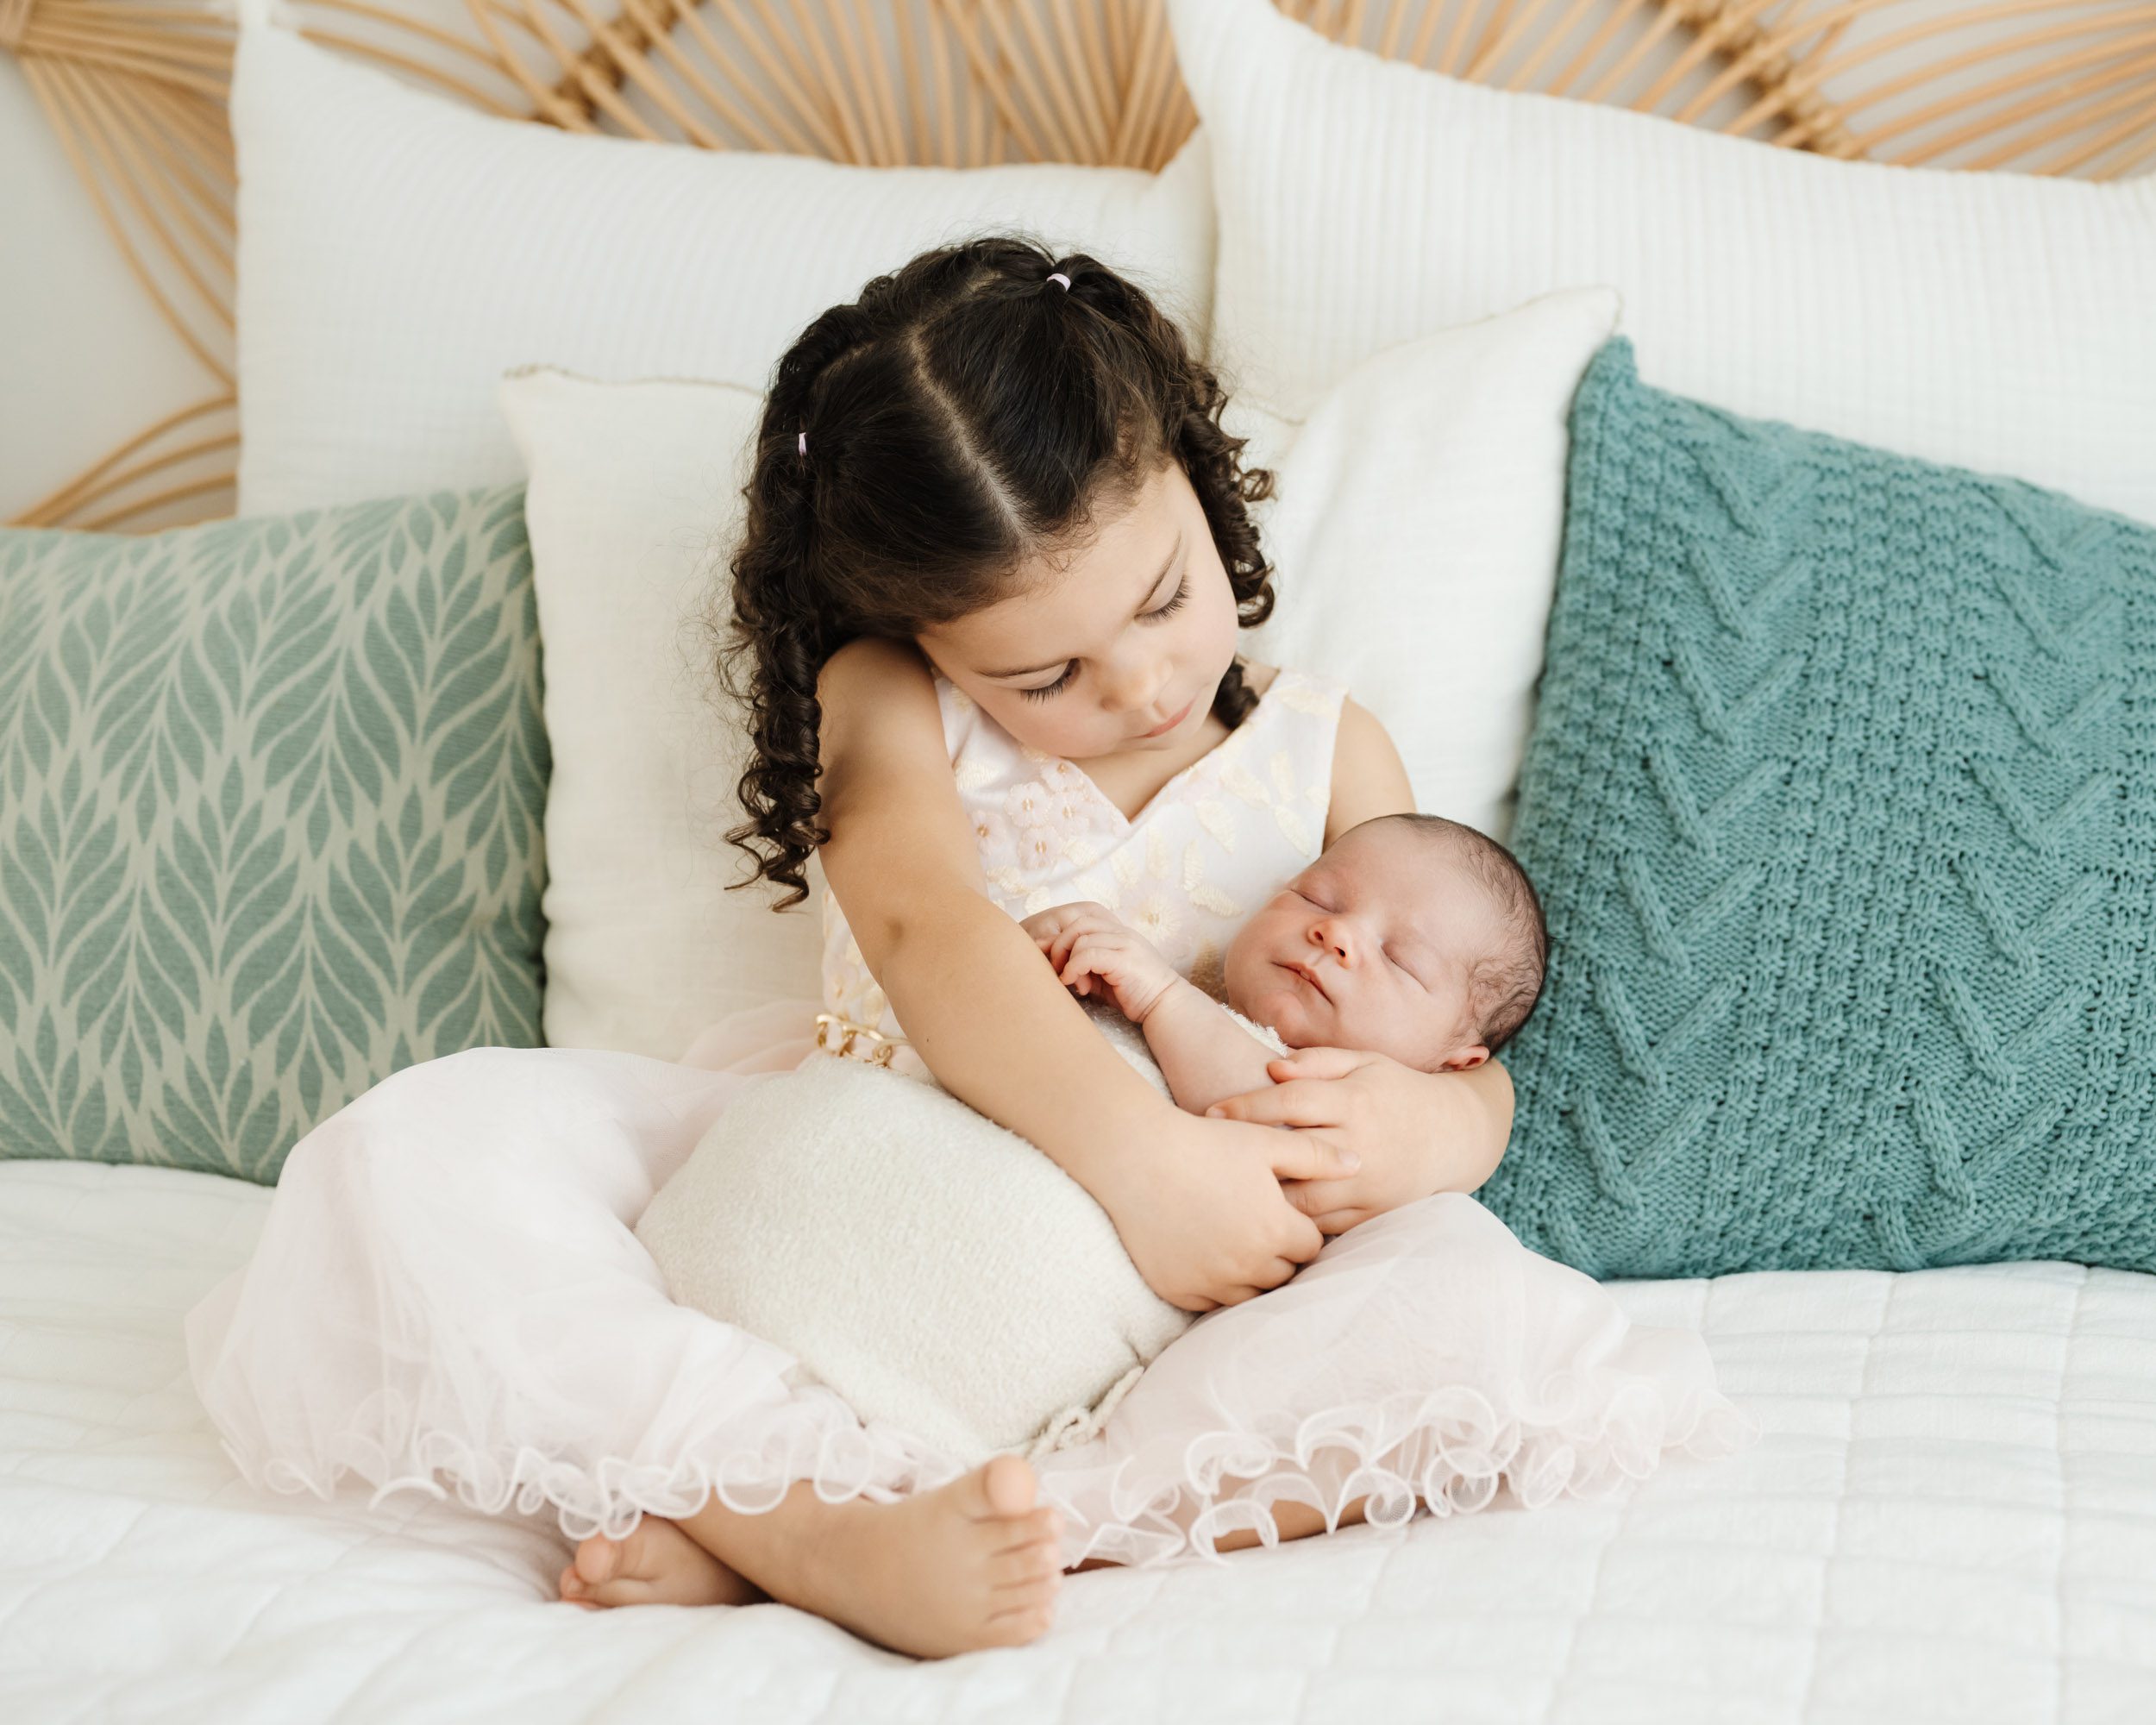 a young sibling sitting on a bed and cradling her baby brother in her arms as she smiles down at him during a newborn photos session